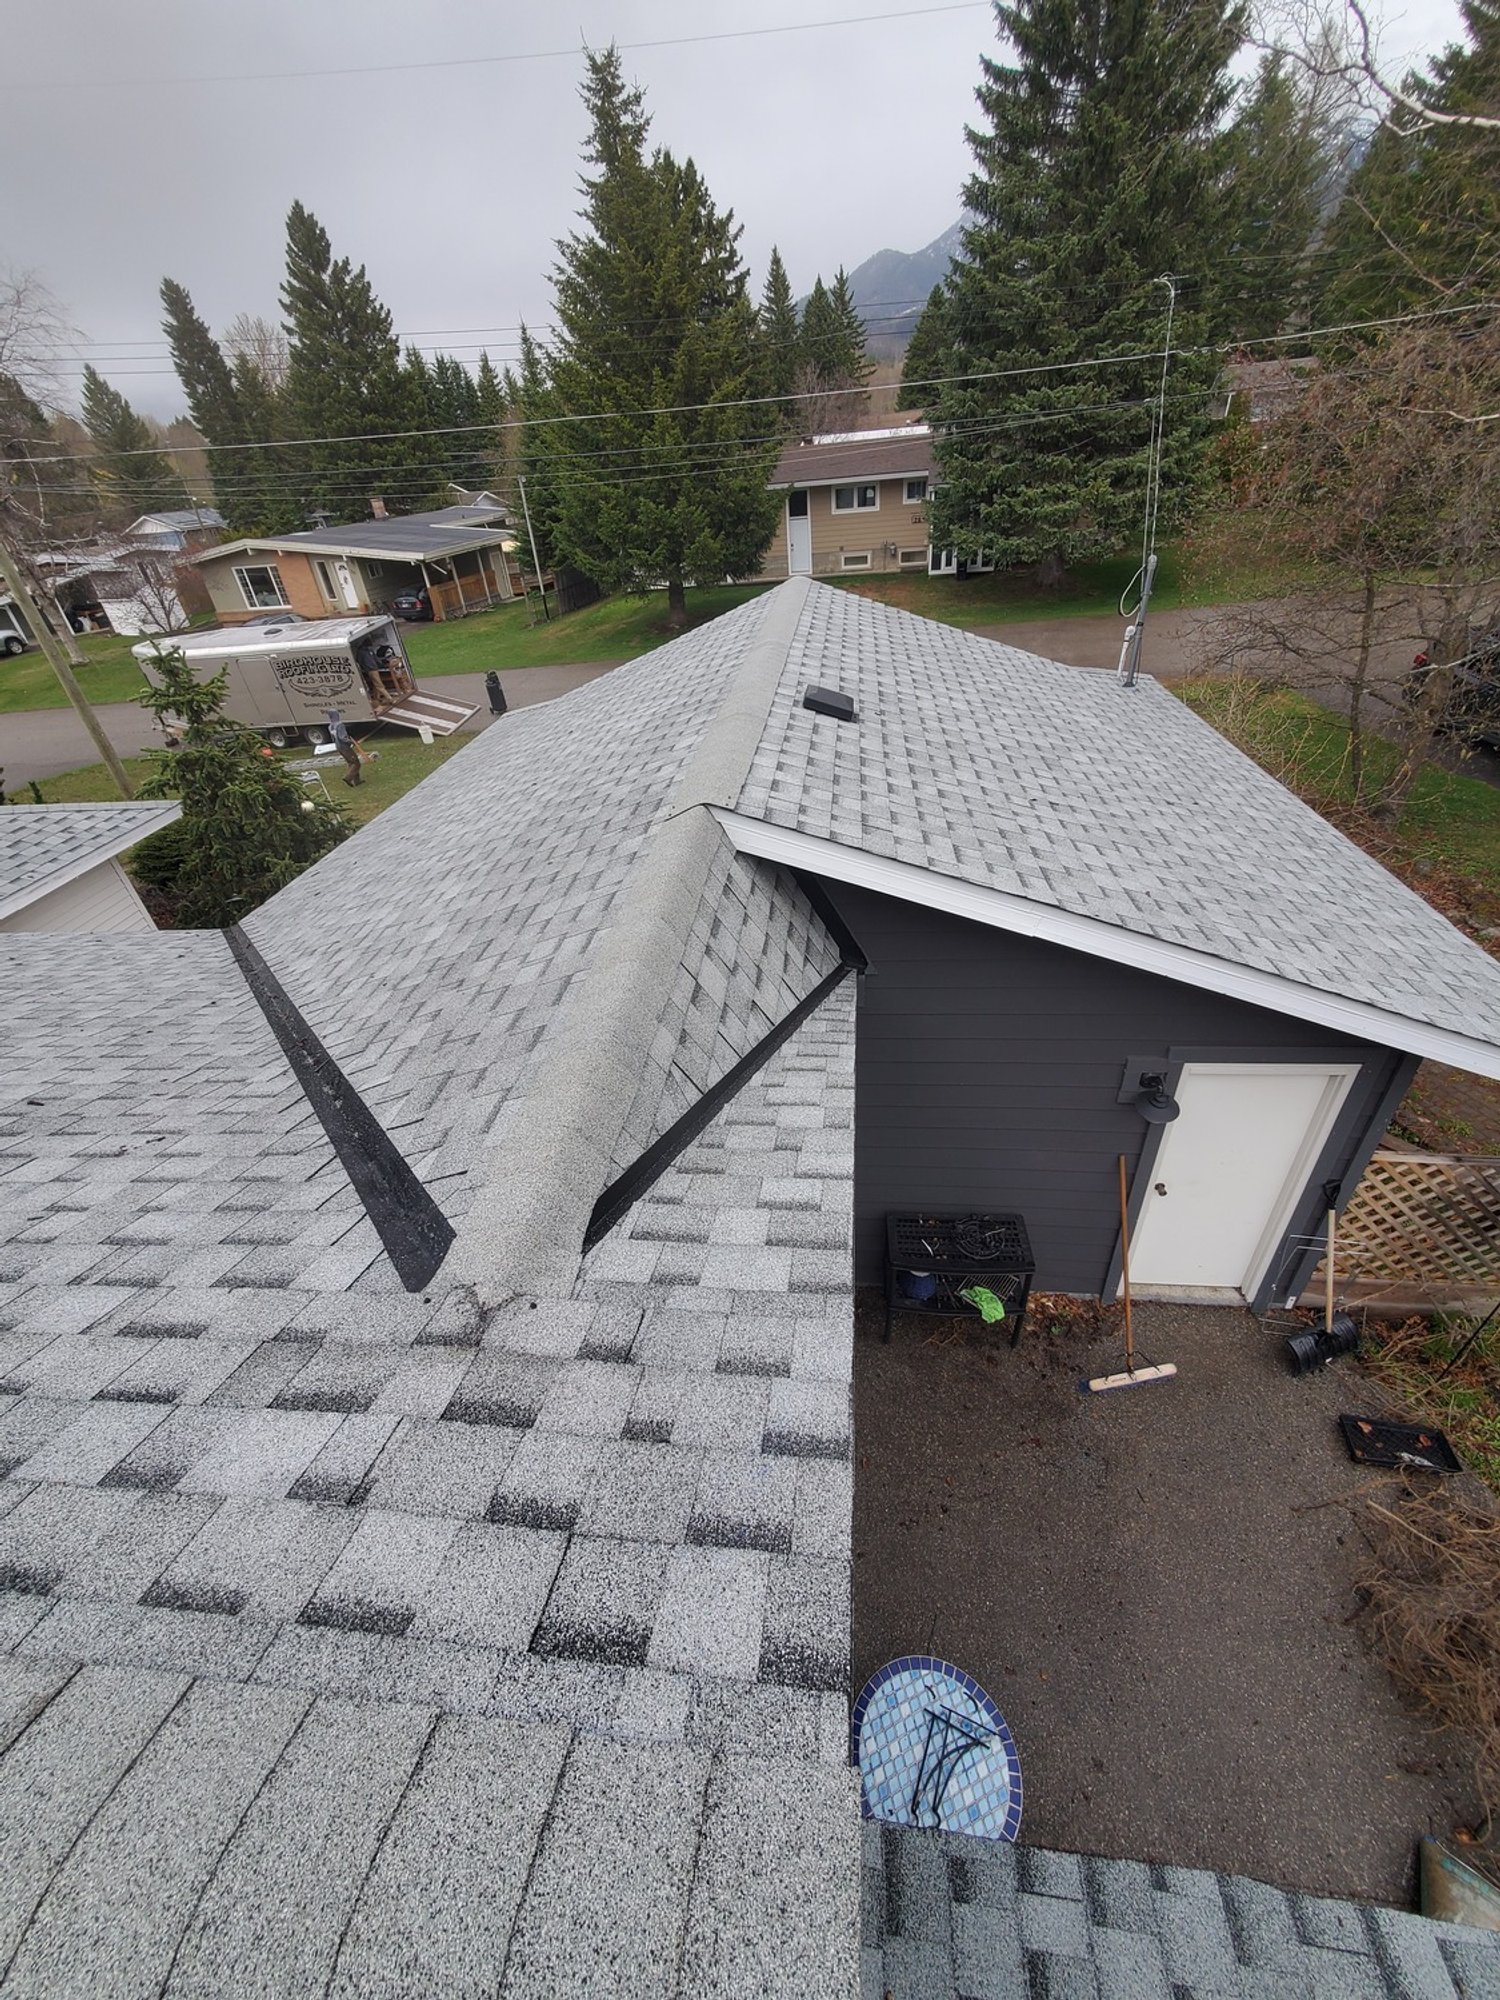 Birdhouse Roofing - After Asphalt IKO Shingles with Steel Valley Pans